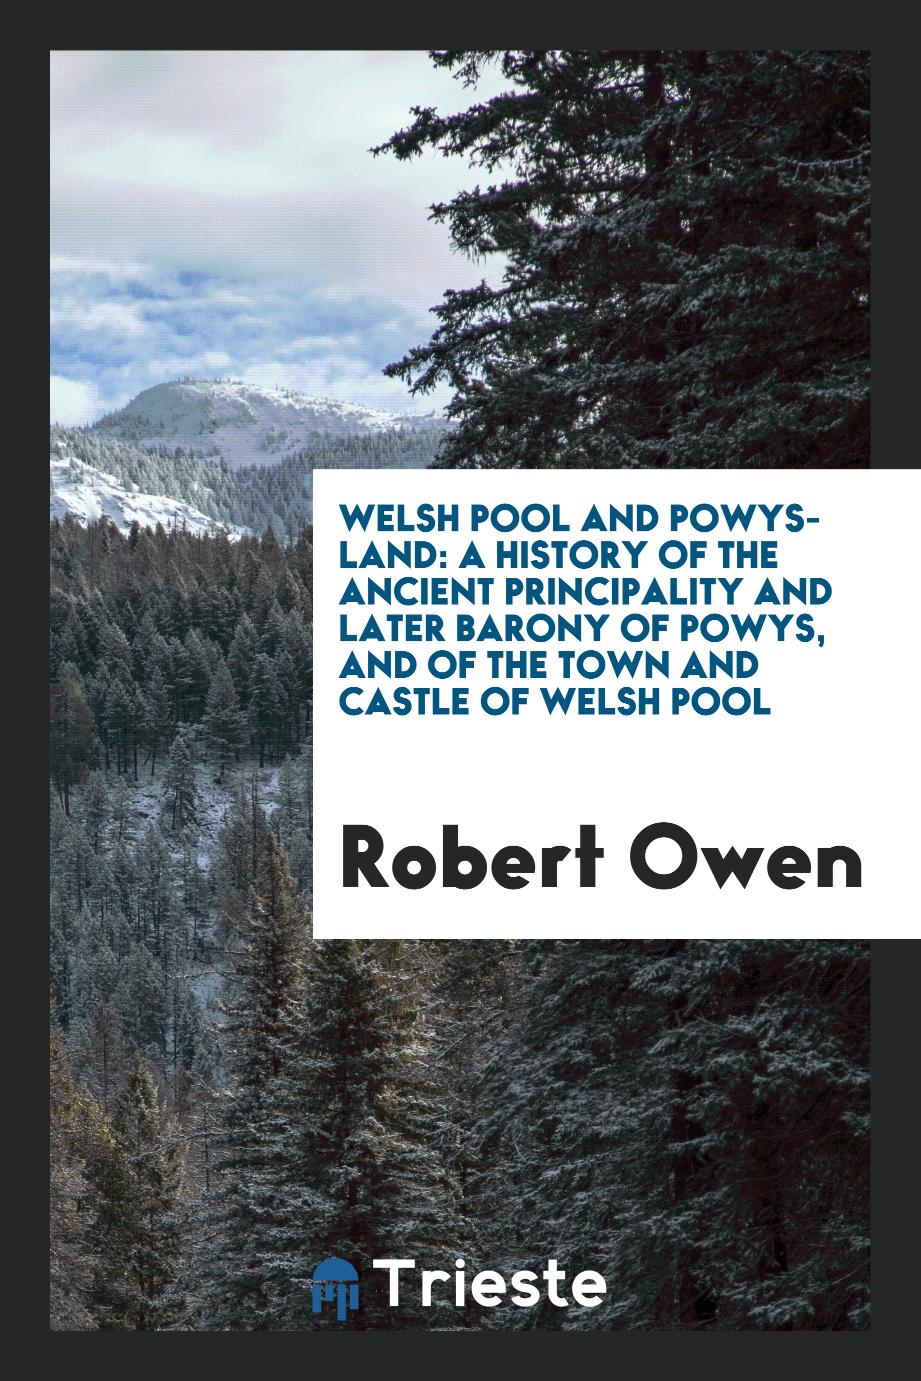 Welsh Pool and Powys-Land: A History of the Ancient Principality and Later Barony of Powys, and of the Town and Castle of Welsh Pool